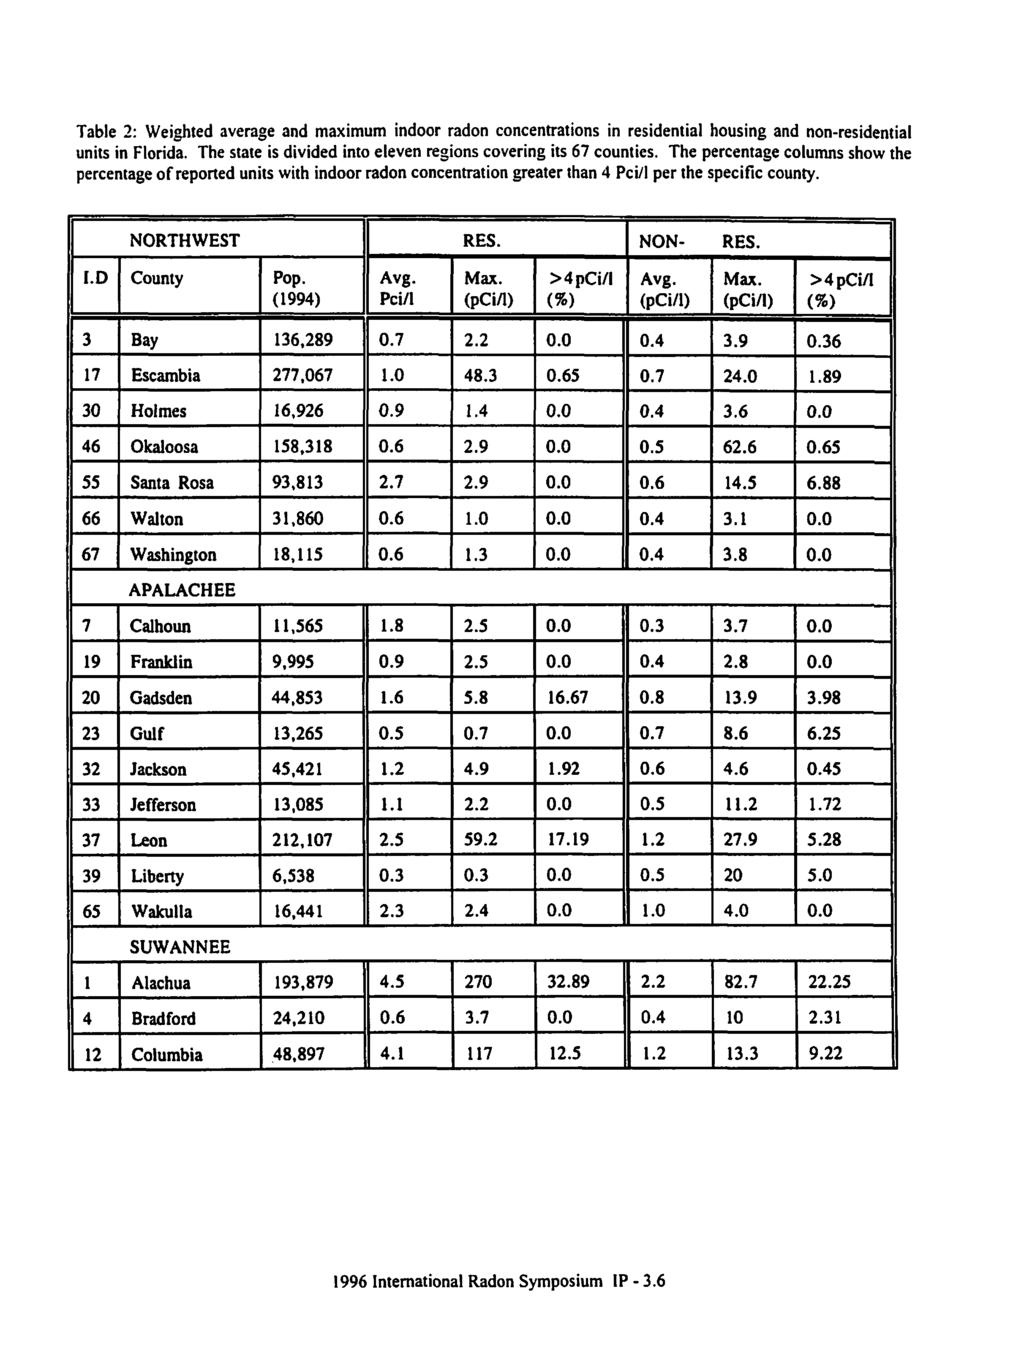 Table 2: Weighted average and maximum indoor radon concentrations in residential housing and non-residential units in Florida. The state is divided into eleven regions covering its 67 counties.